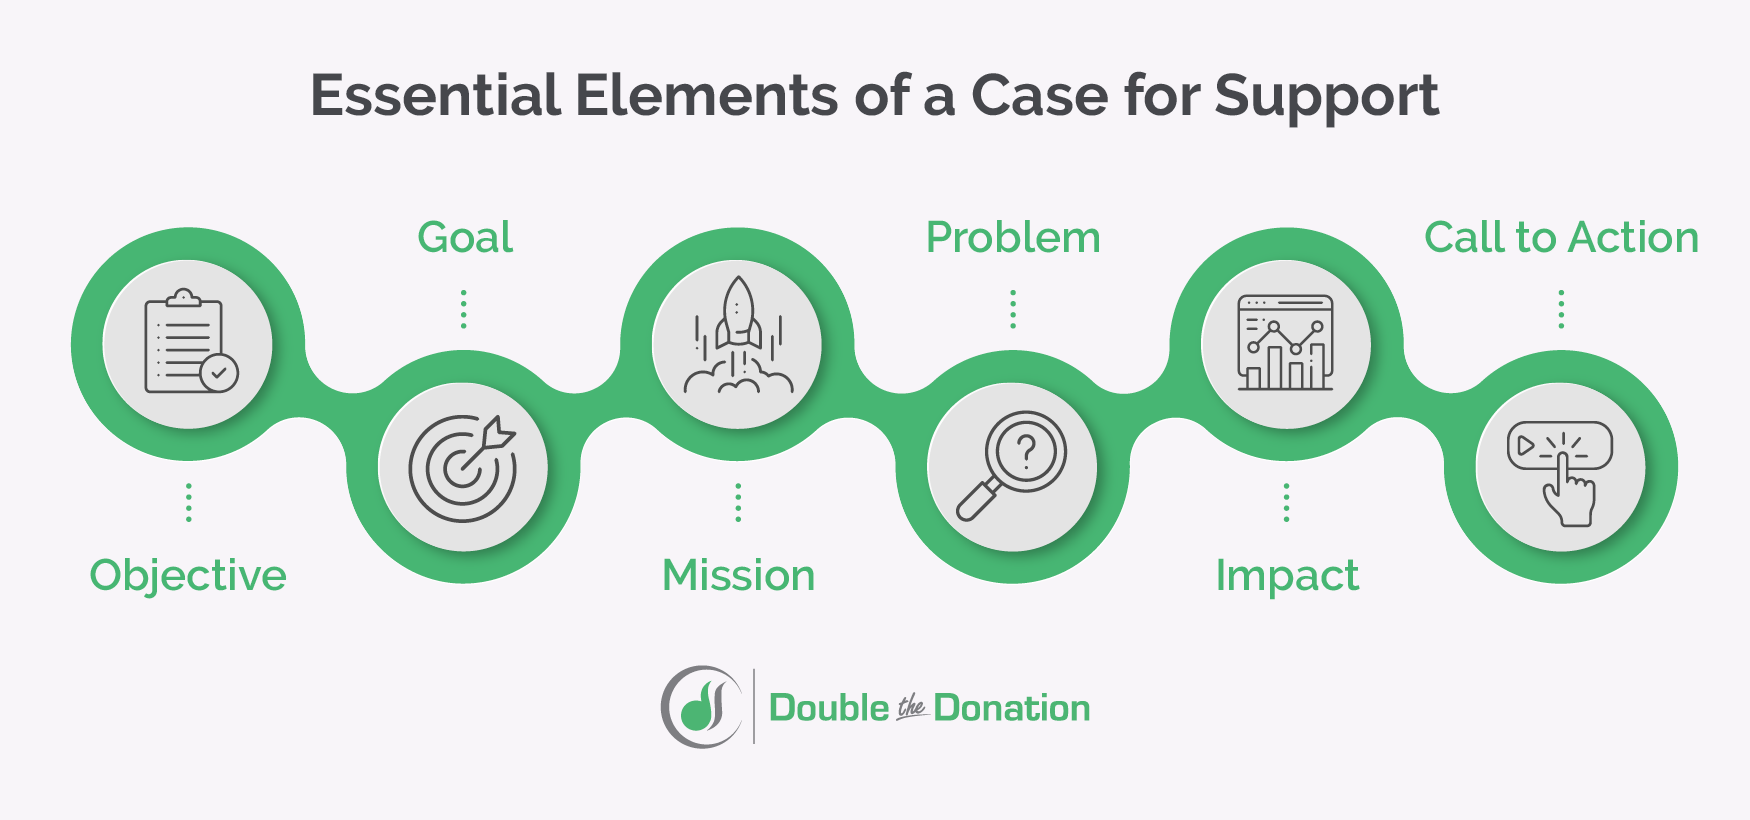 The elements of a nonprofit case for support, detailed in the text below